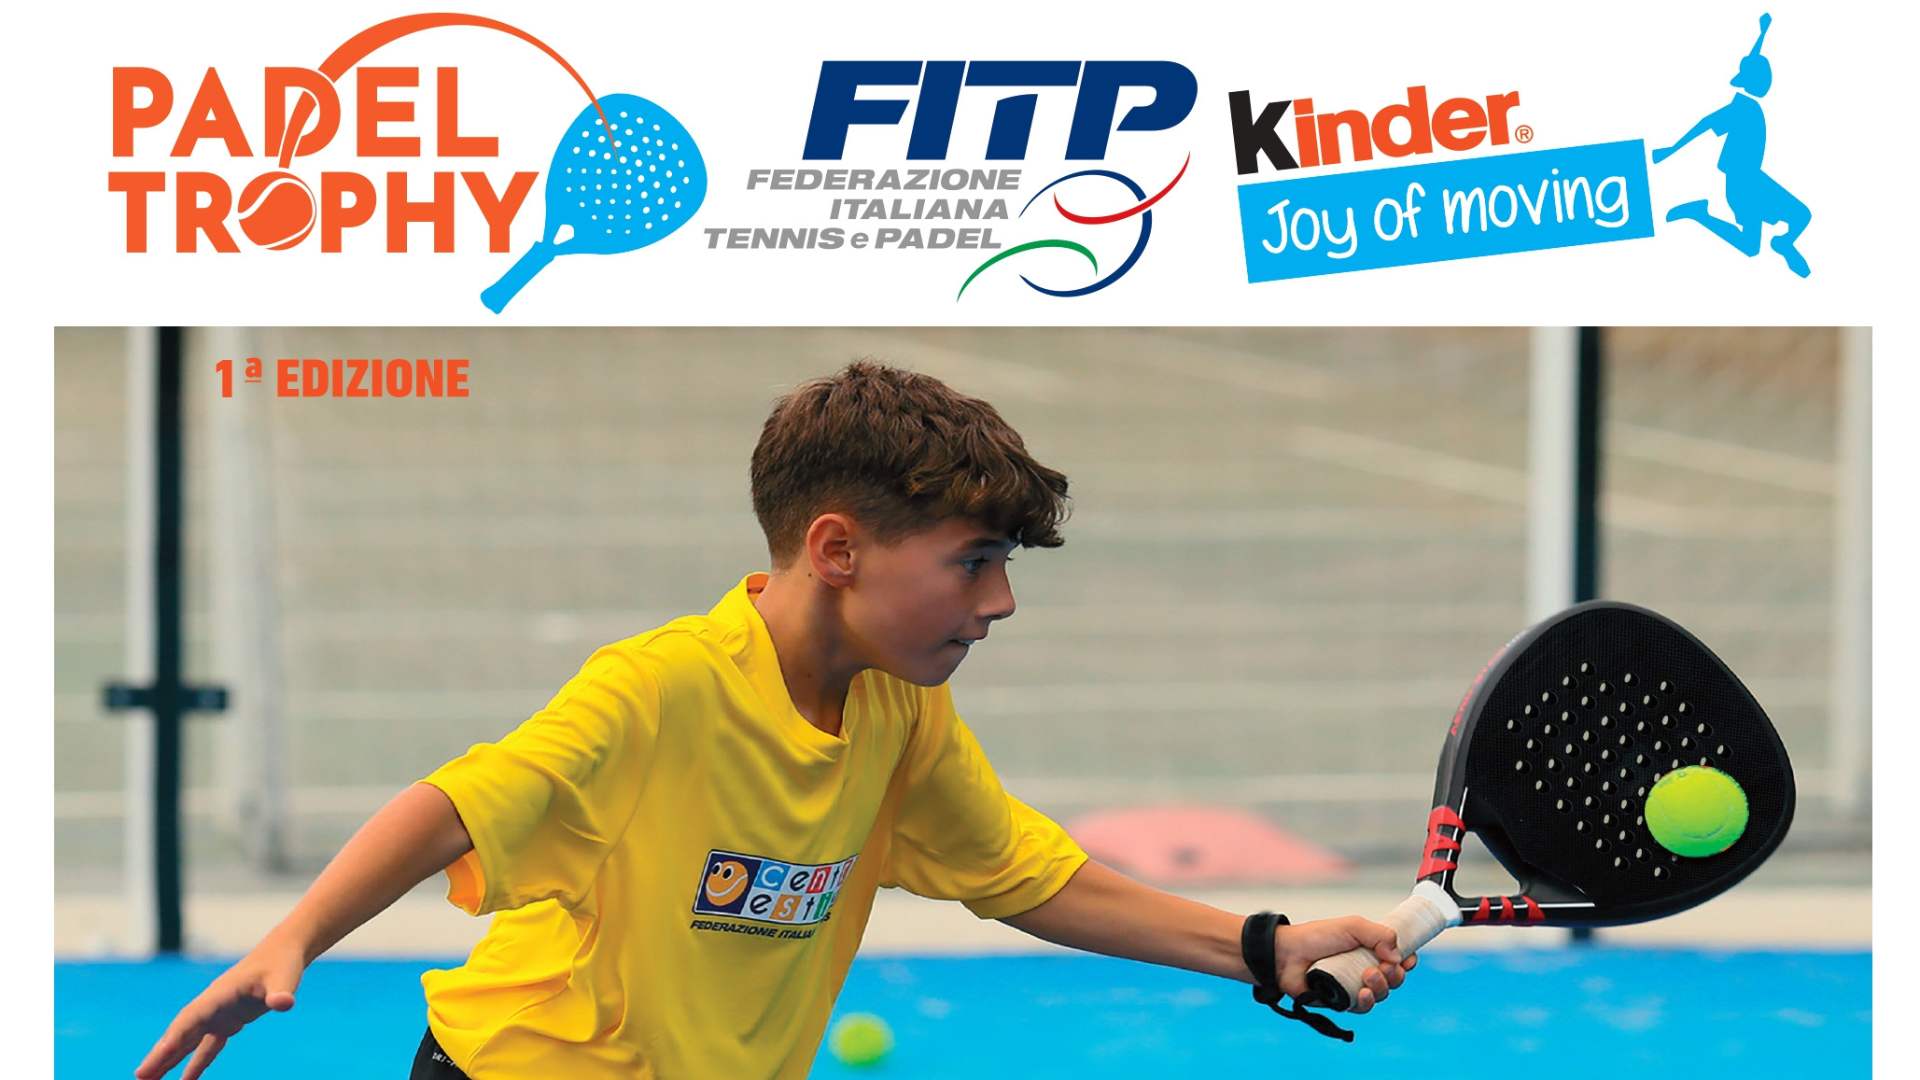 Padel Trophy Fitp Kinder Joy of Moving - Country Club Bologna